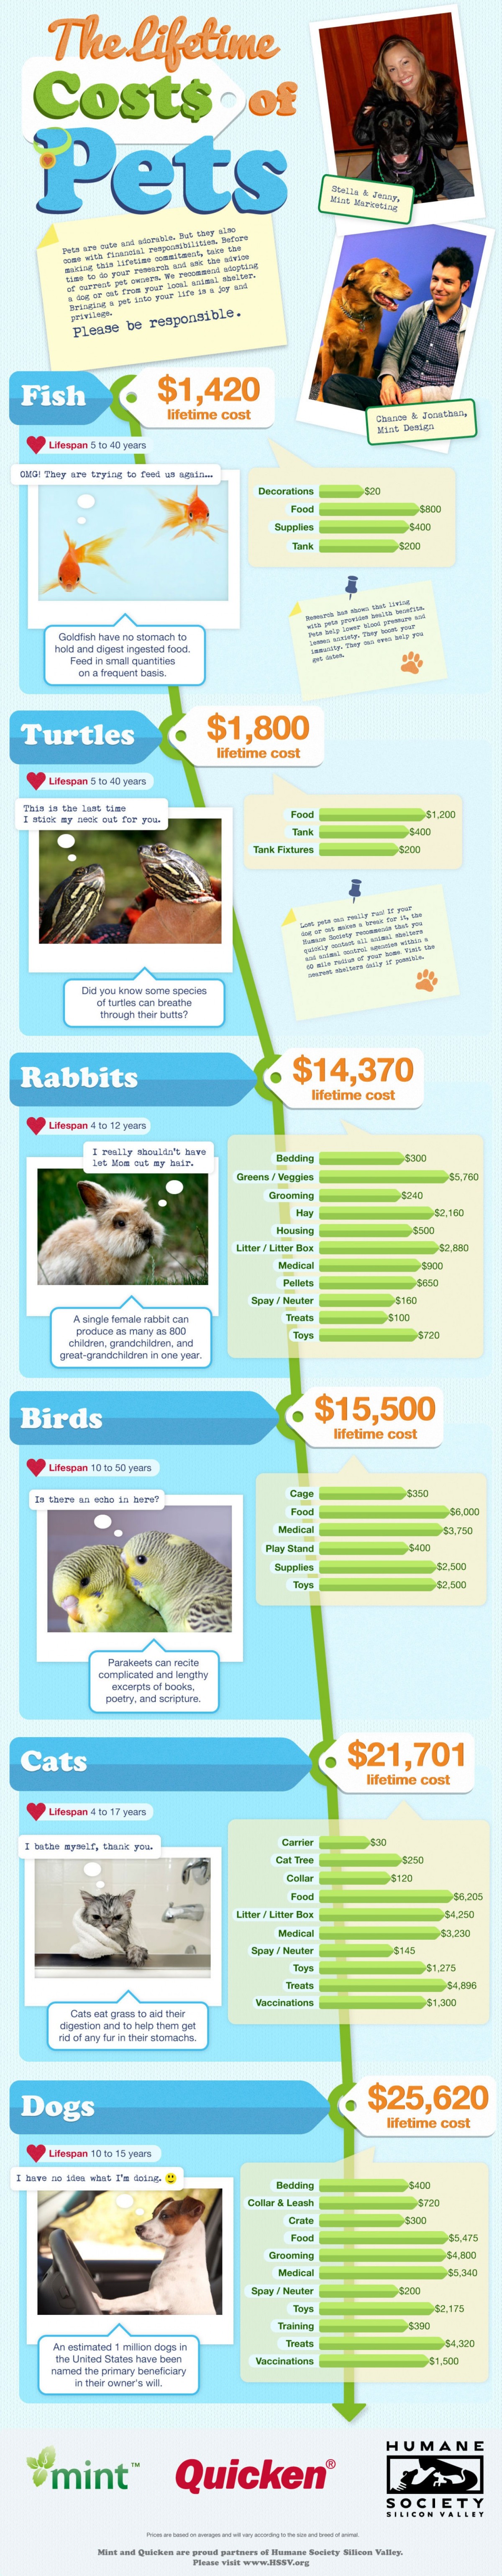 The Lifetime Costs of Pets